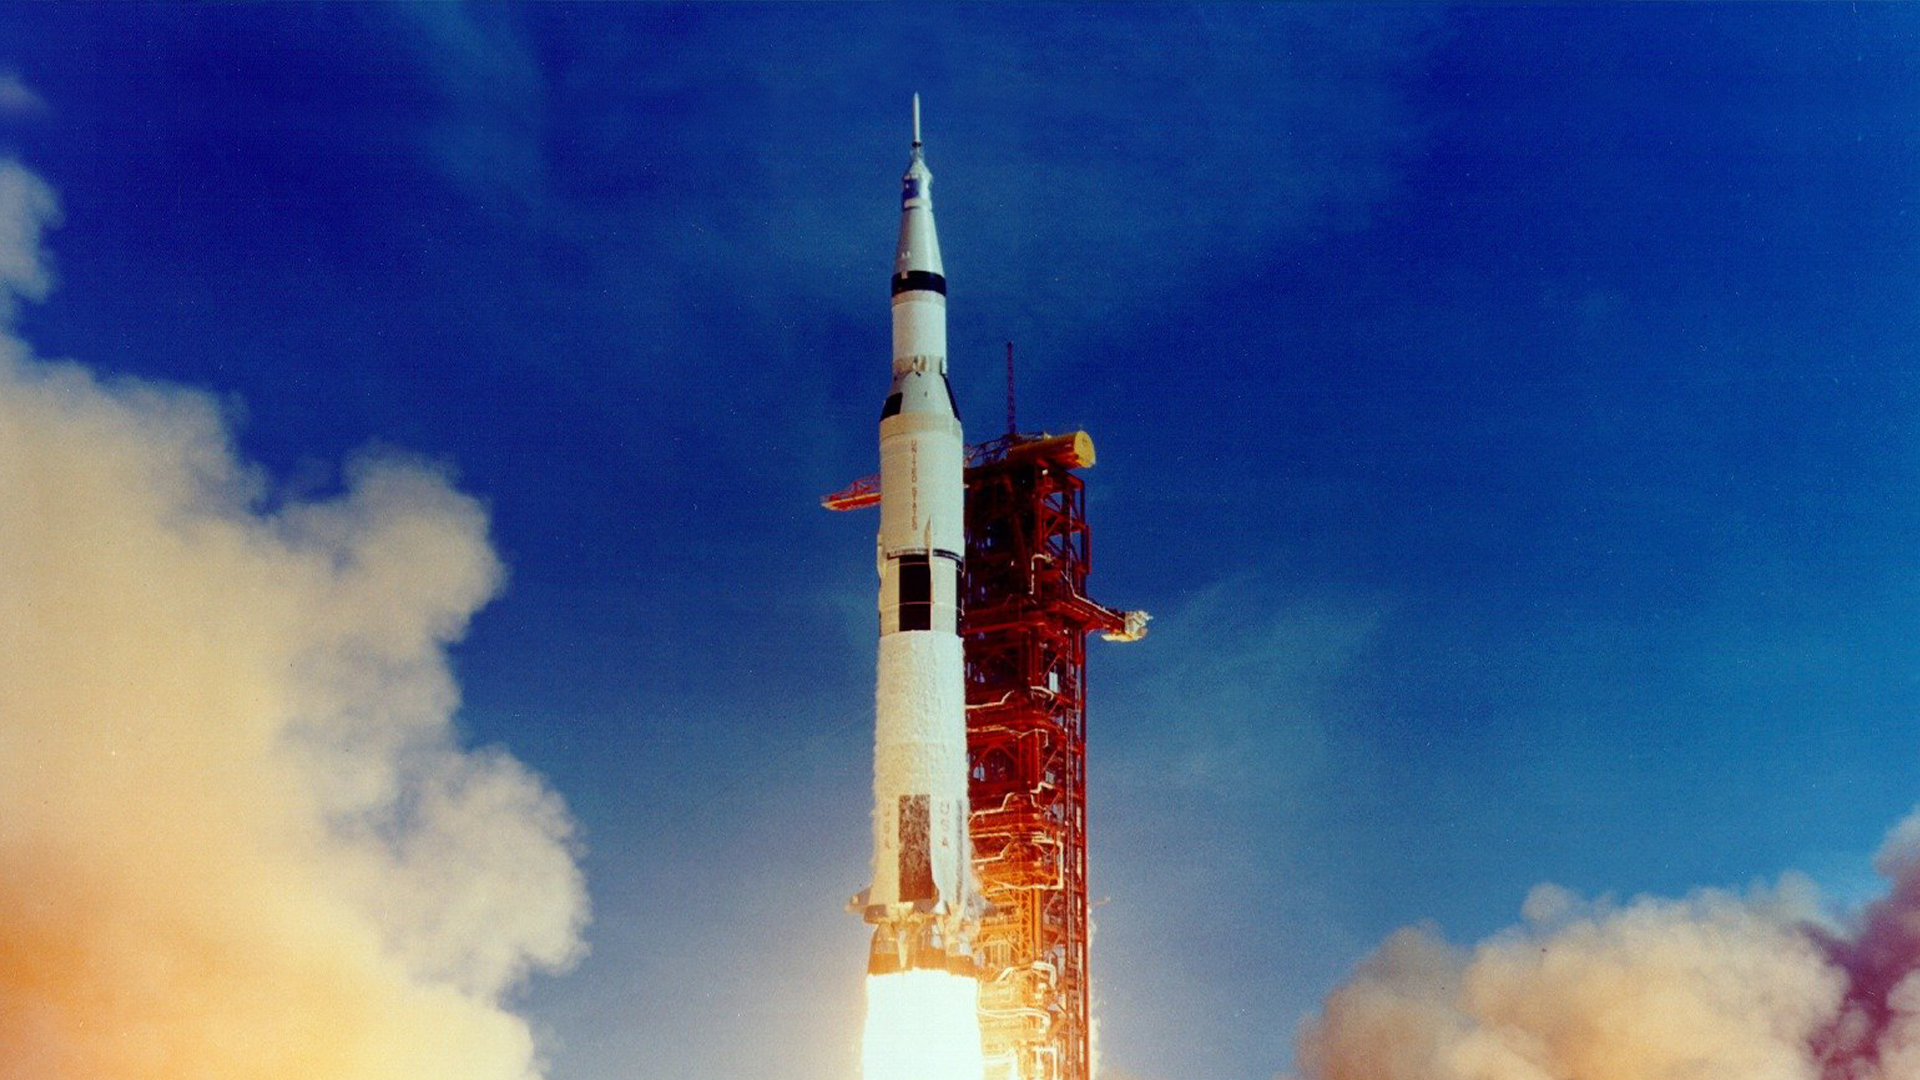 13 Factors That Saved Apollo 13 - E1 - Earth to the Moon